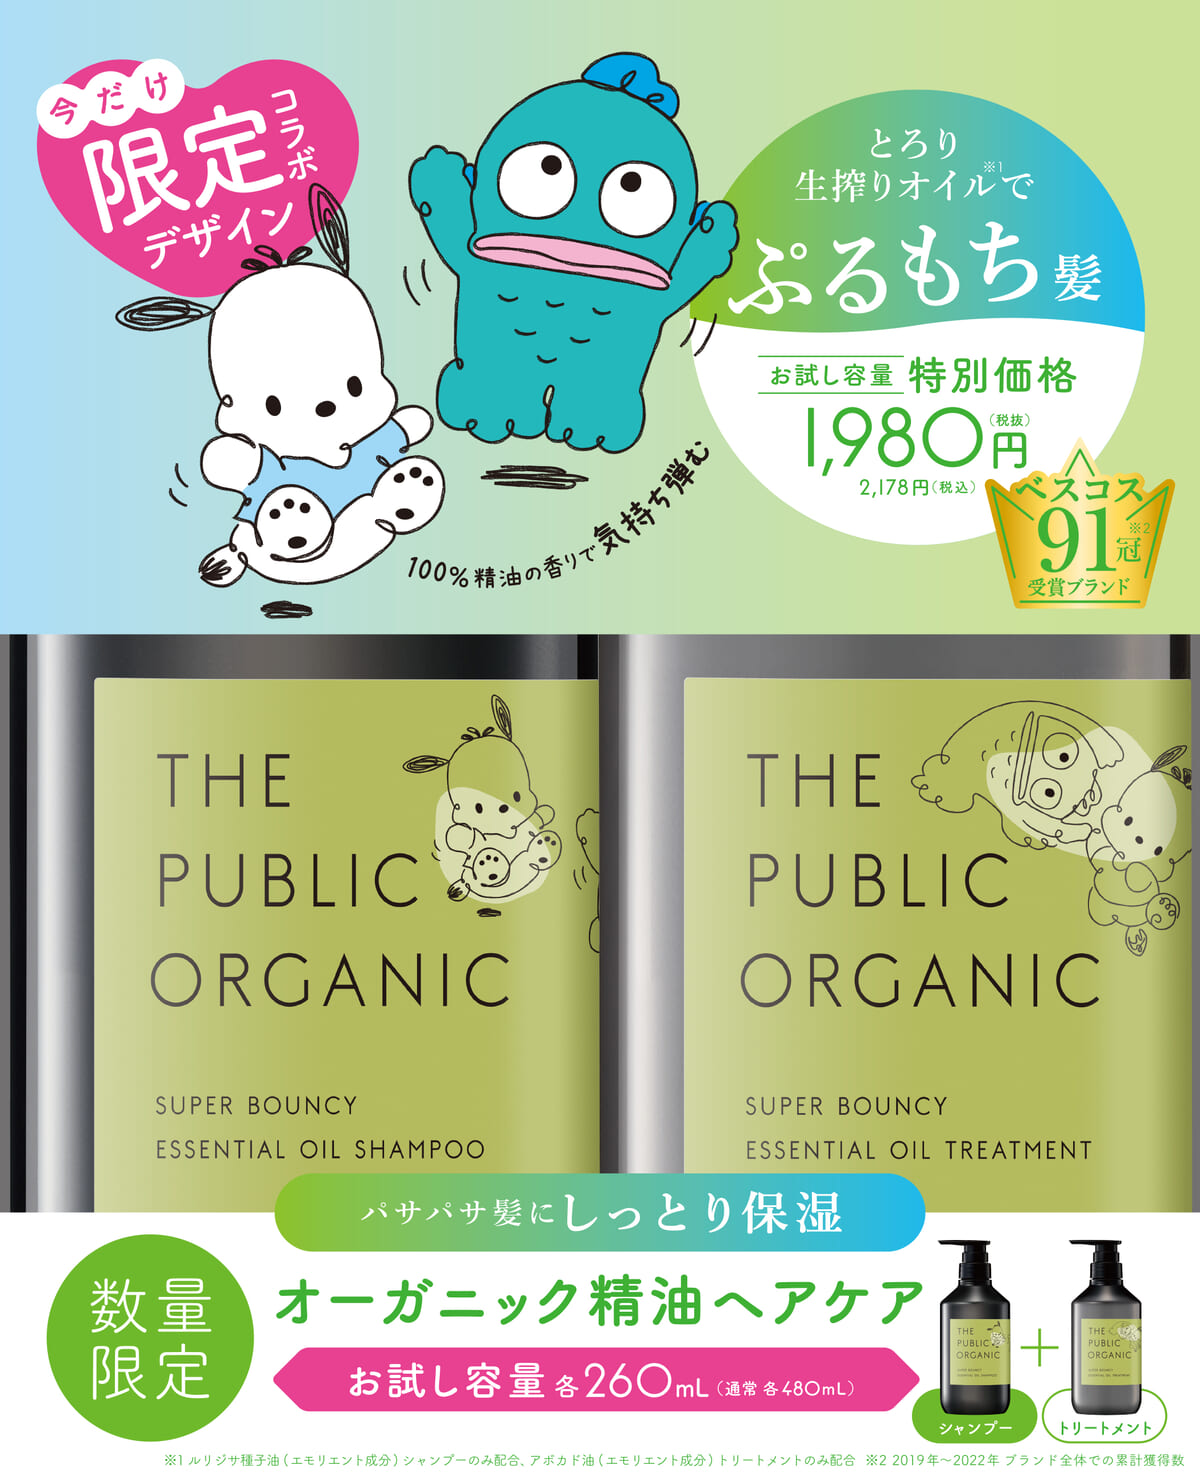 THE PUBLIC ORGANIC SUPER BOUNCY × ポチャッコ&ハンギョドン